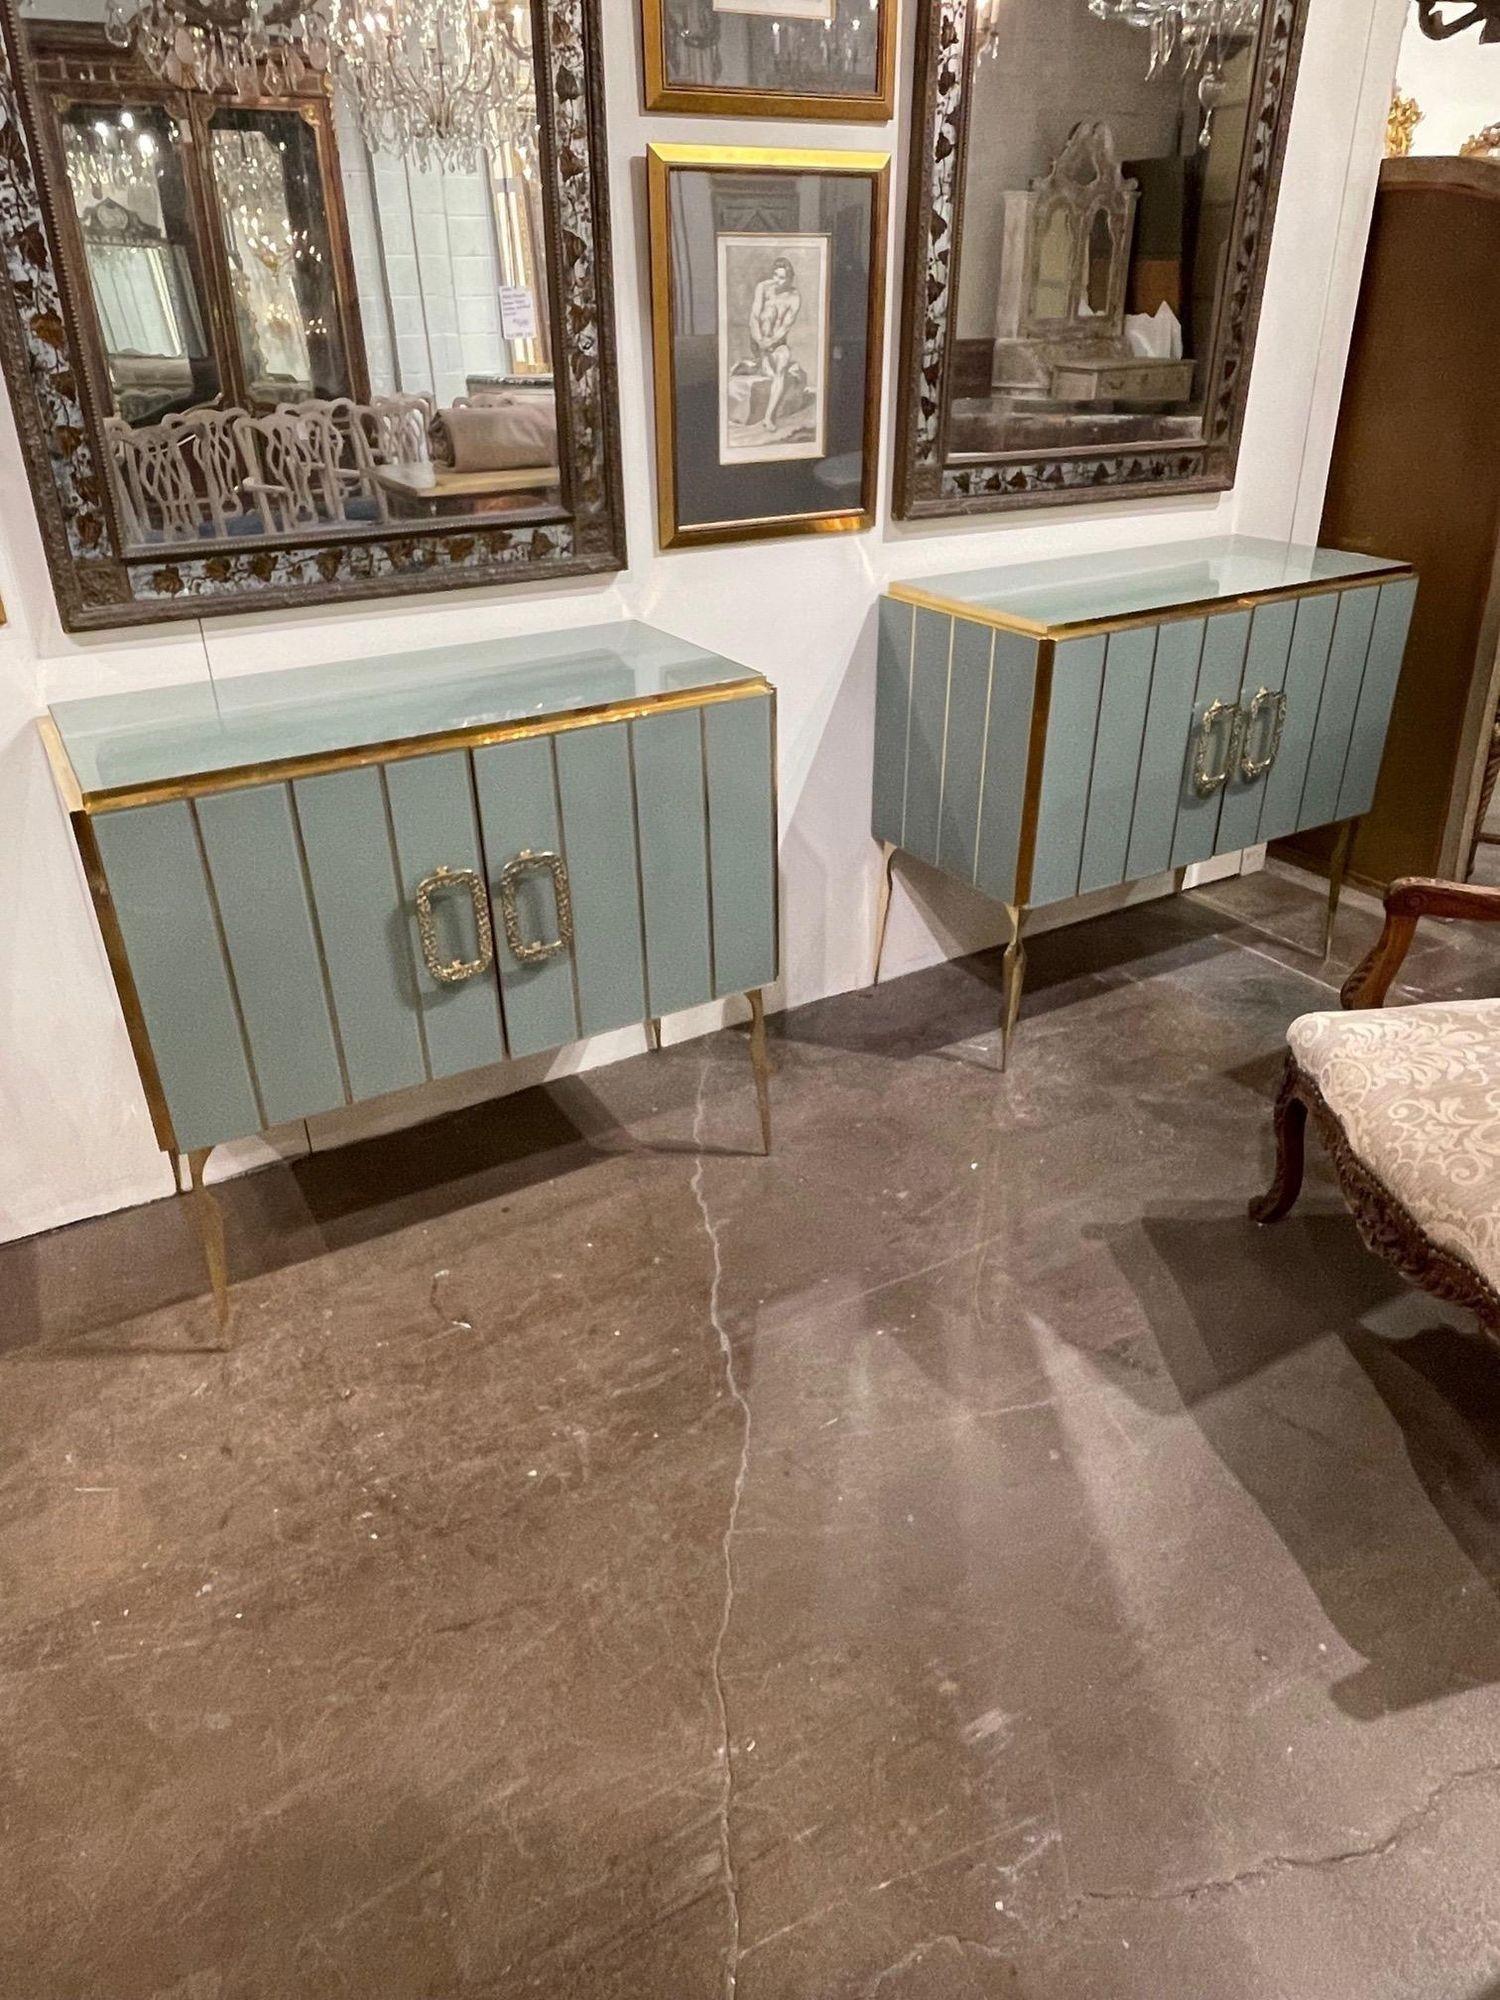 Fabulous pair of Murano glass and brass side cabinets in a pale green. Nice brass details and a shelf inside for storage. Creates a very upscale modern look. Stunning!